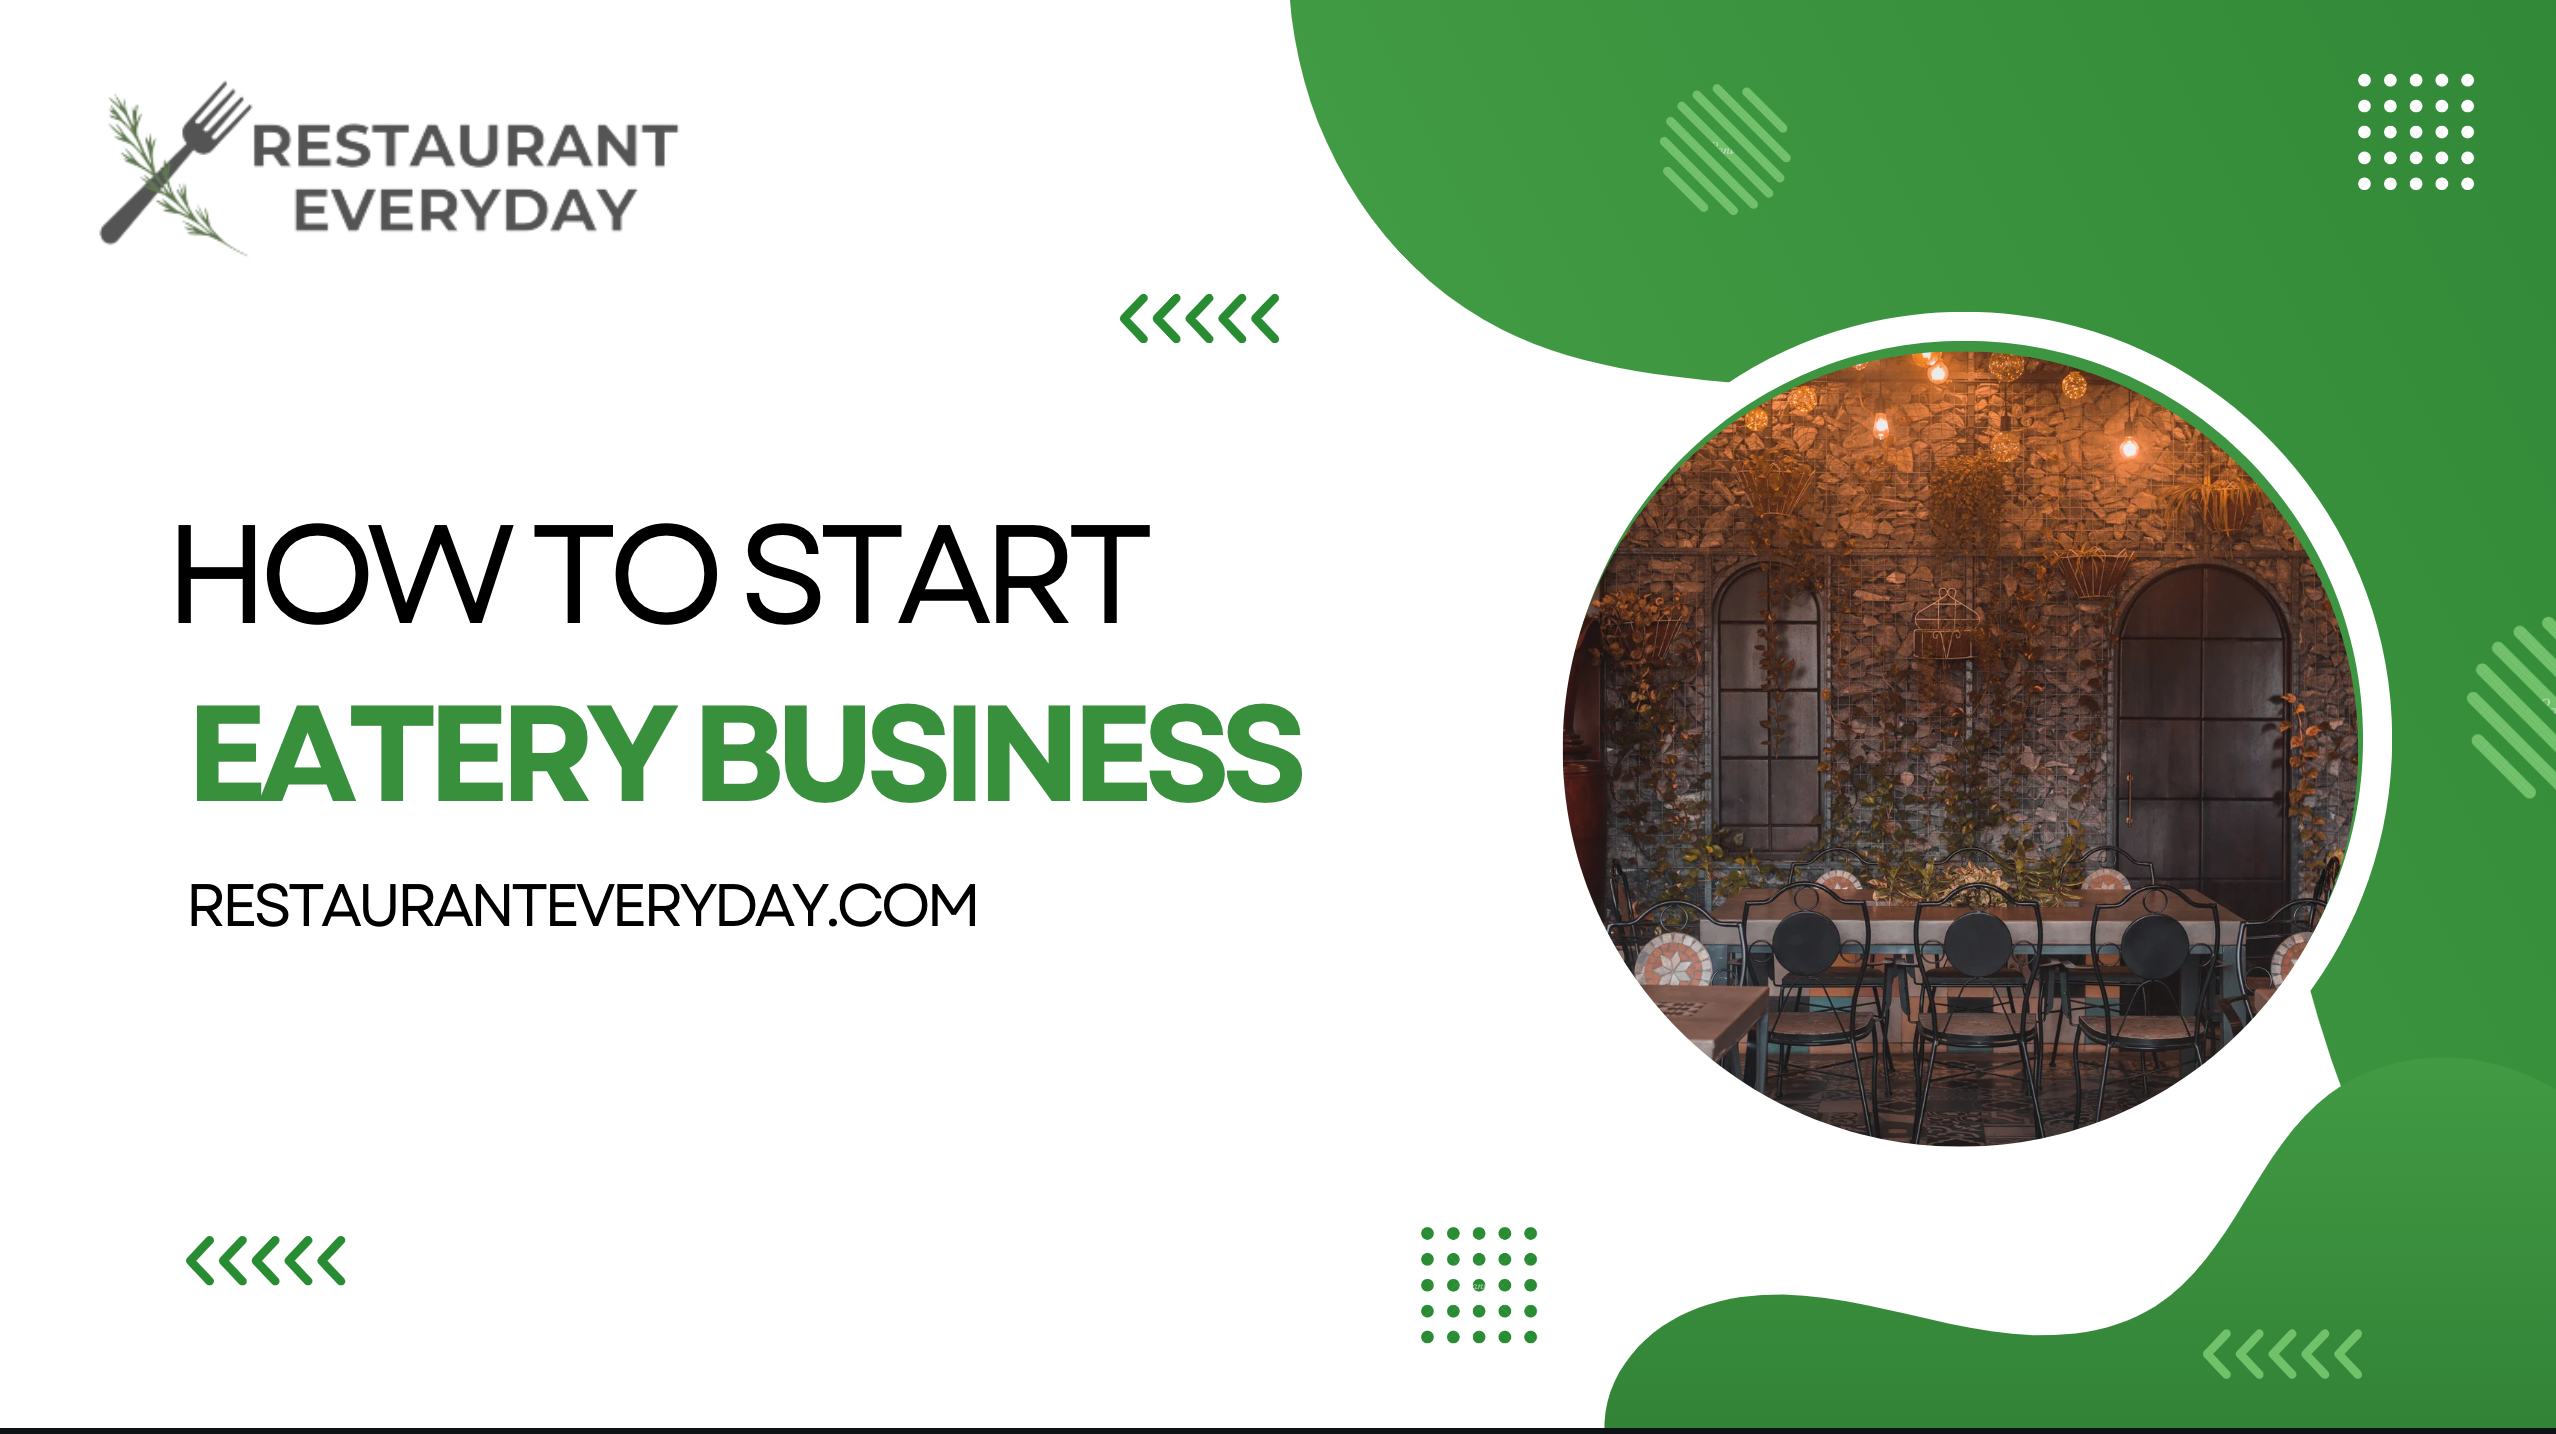 How to Start Eatery Business